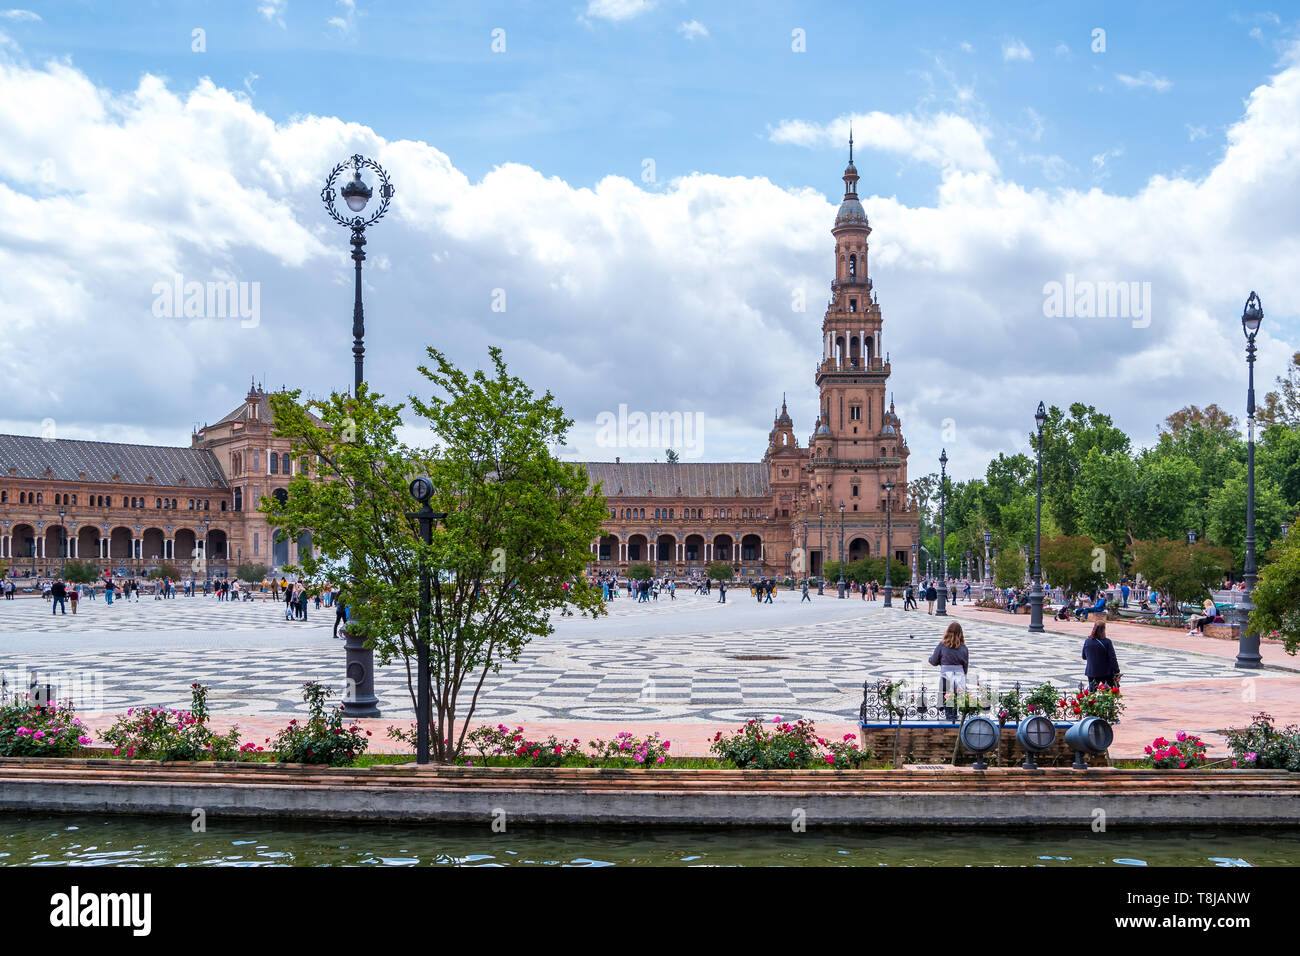 Seville Spain May 8th 2019 The Plaza de Espania is a Square located in the Park in Seville Built in 1928 for the Ibero-American Exposition of 1929. Stock Photo